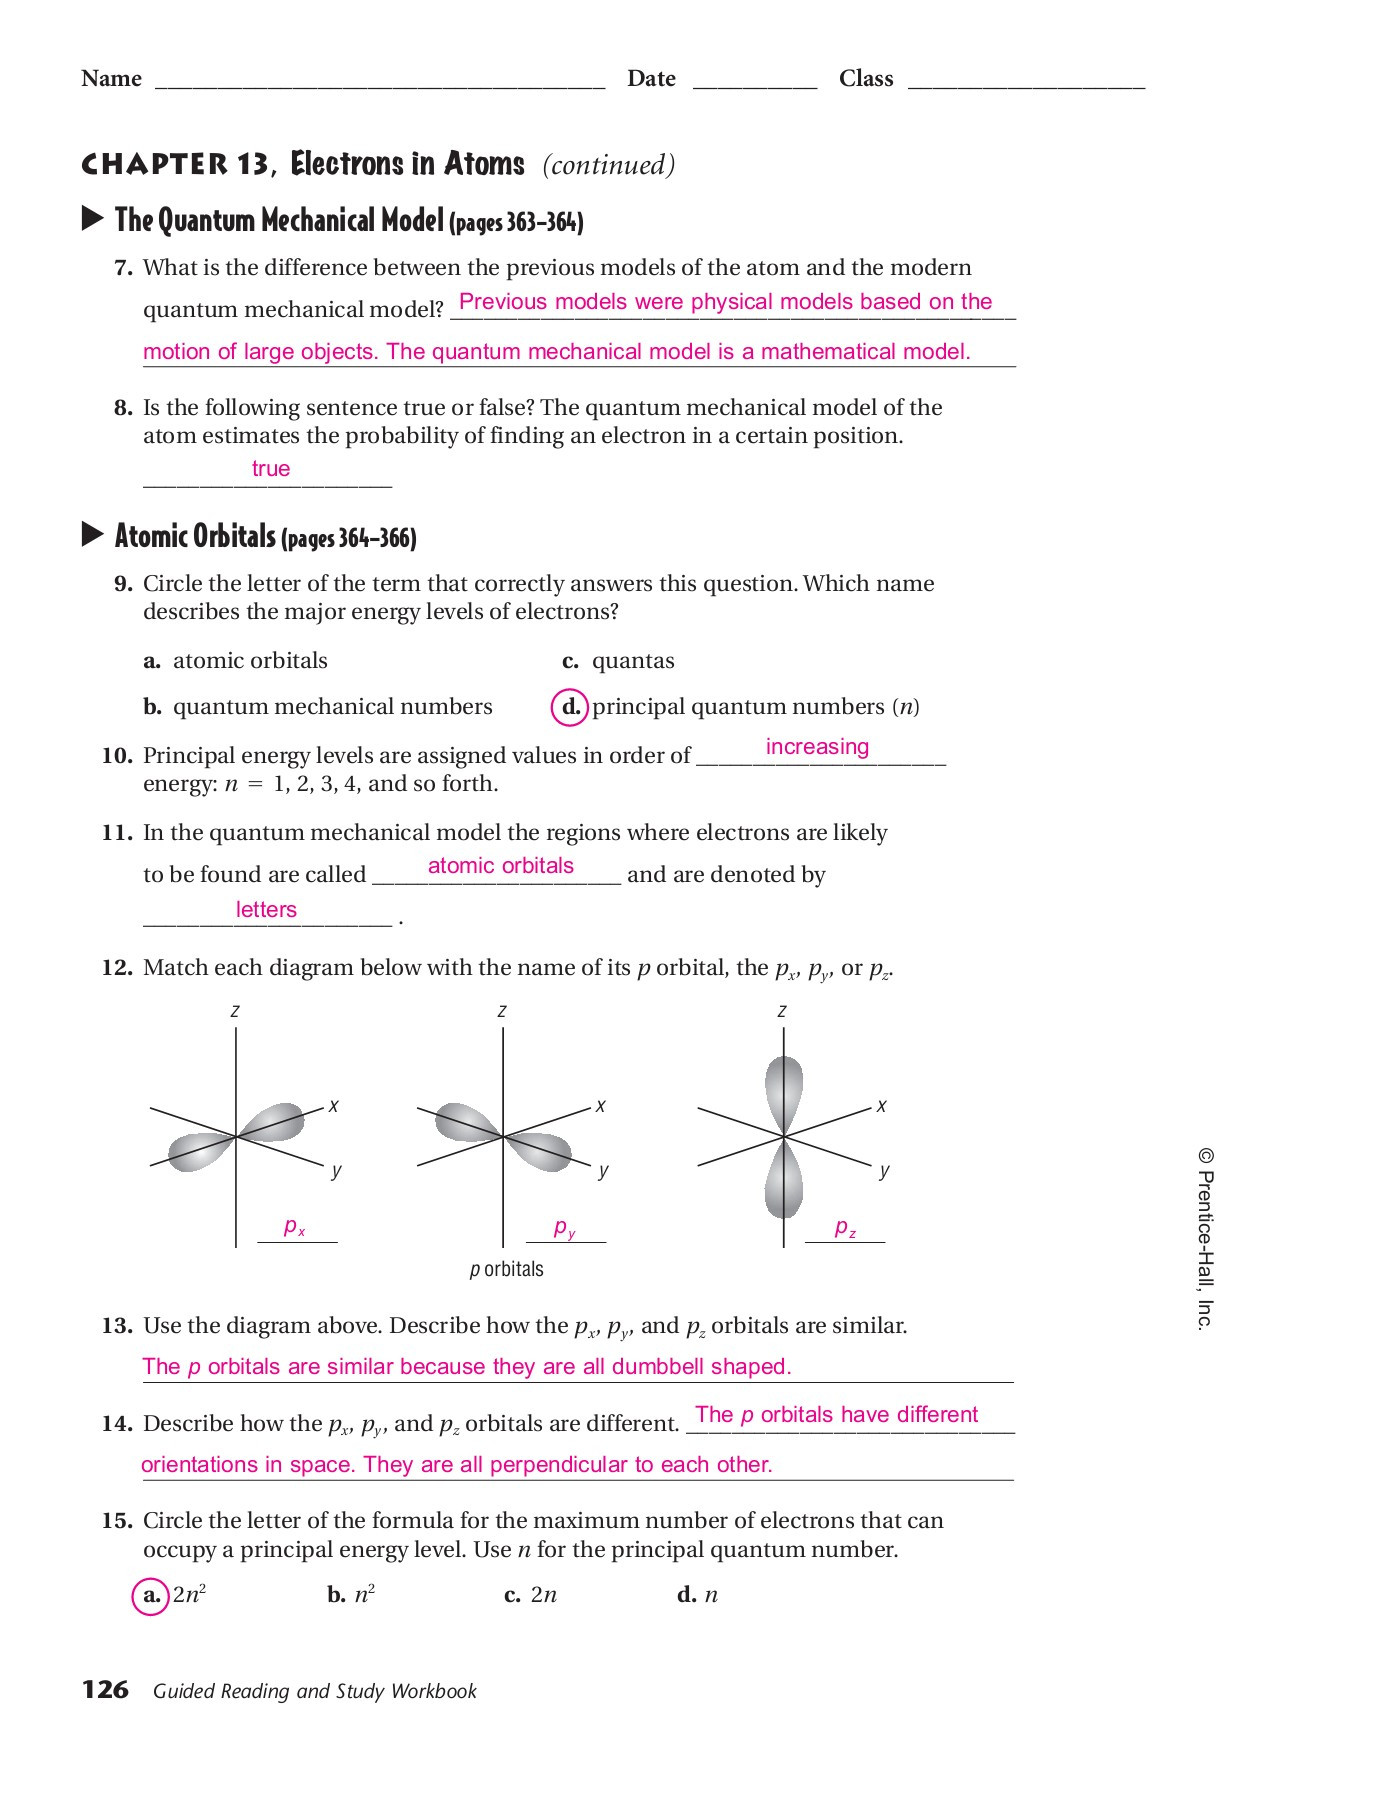 Quantum Numbers Practice Worksheet 13 Electrons In atoms Teacher Notes Pages 1 6 Text